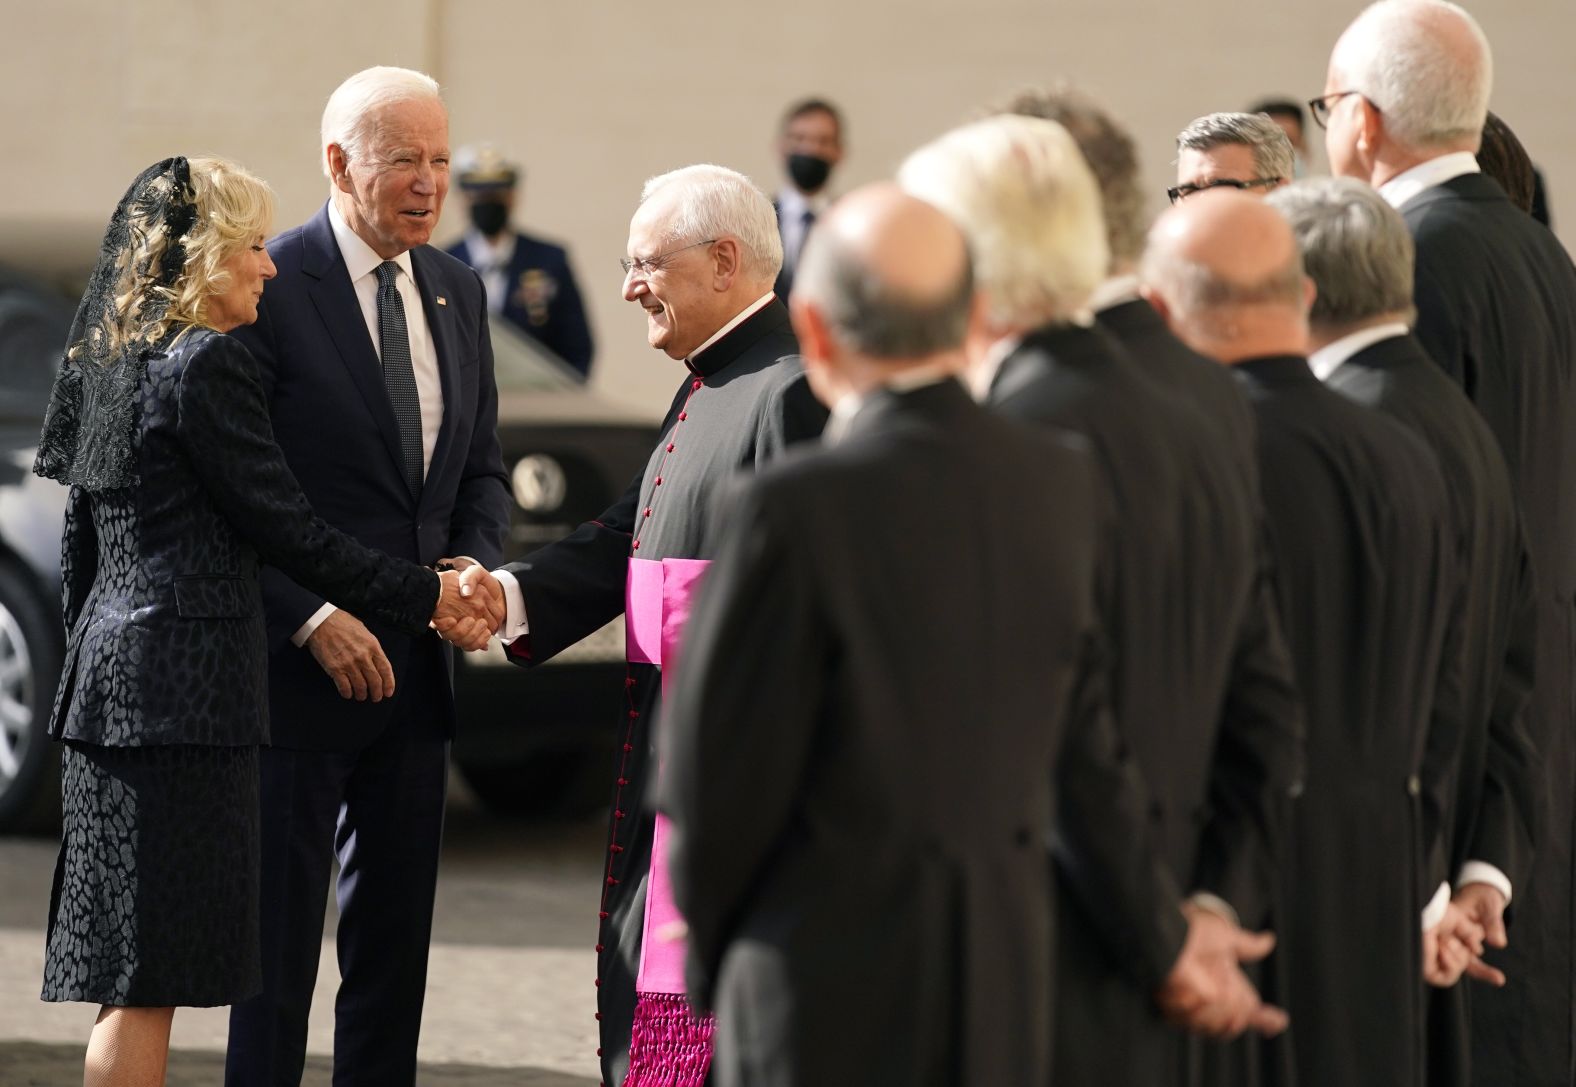 The Bidens are greeted by Monsignor Leonardo Sapienza, the head of the papal household, as they arrive to meet with the Pope.